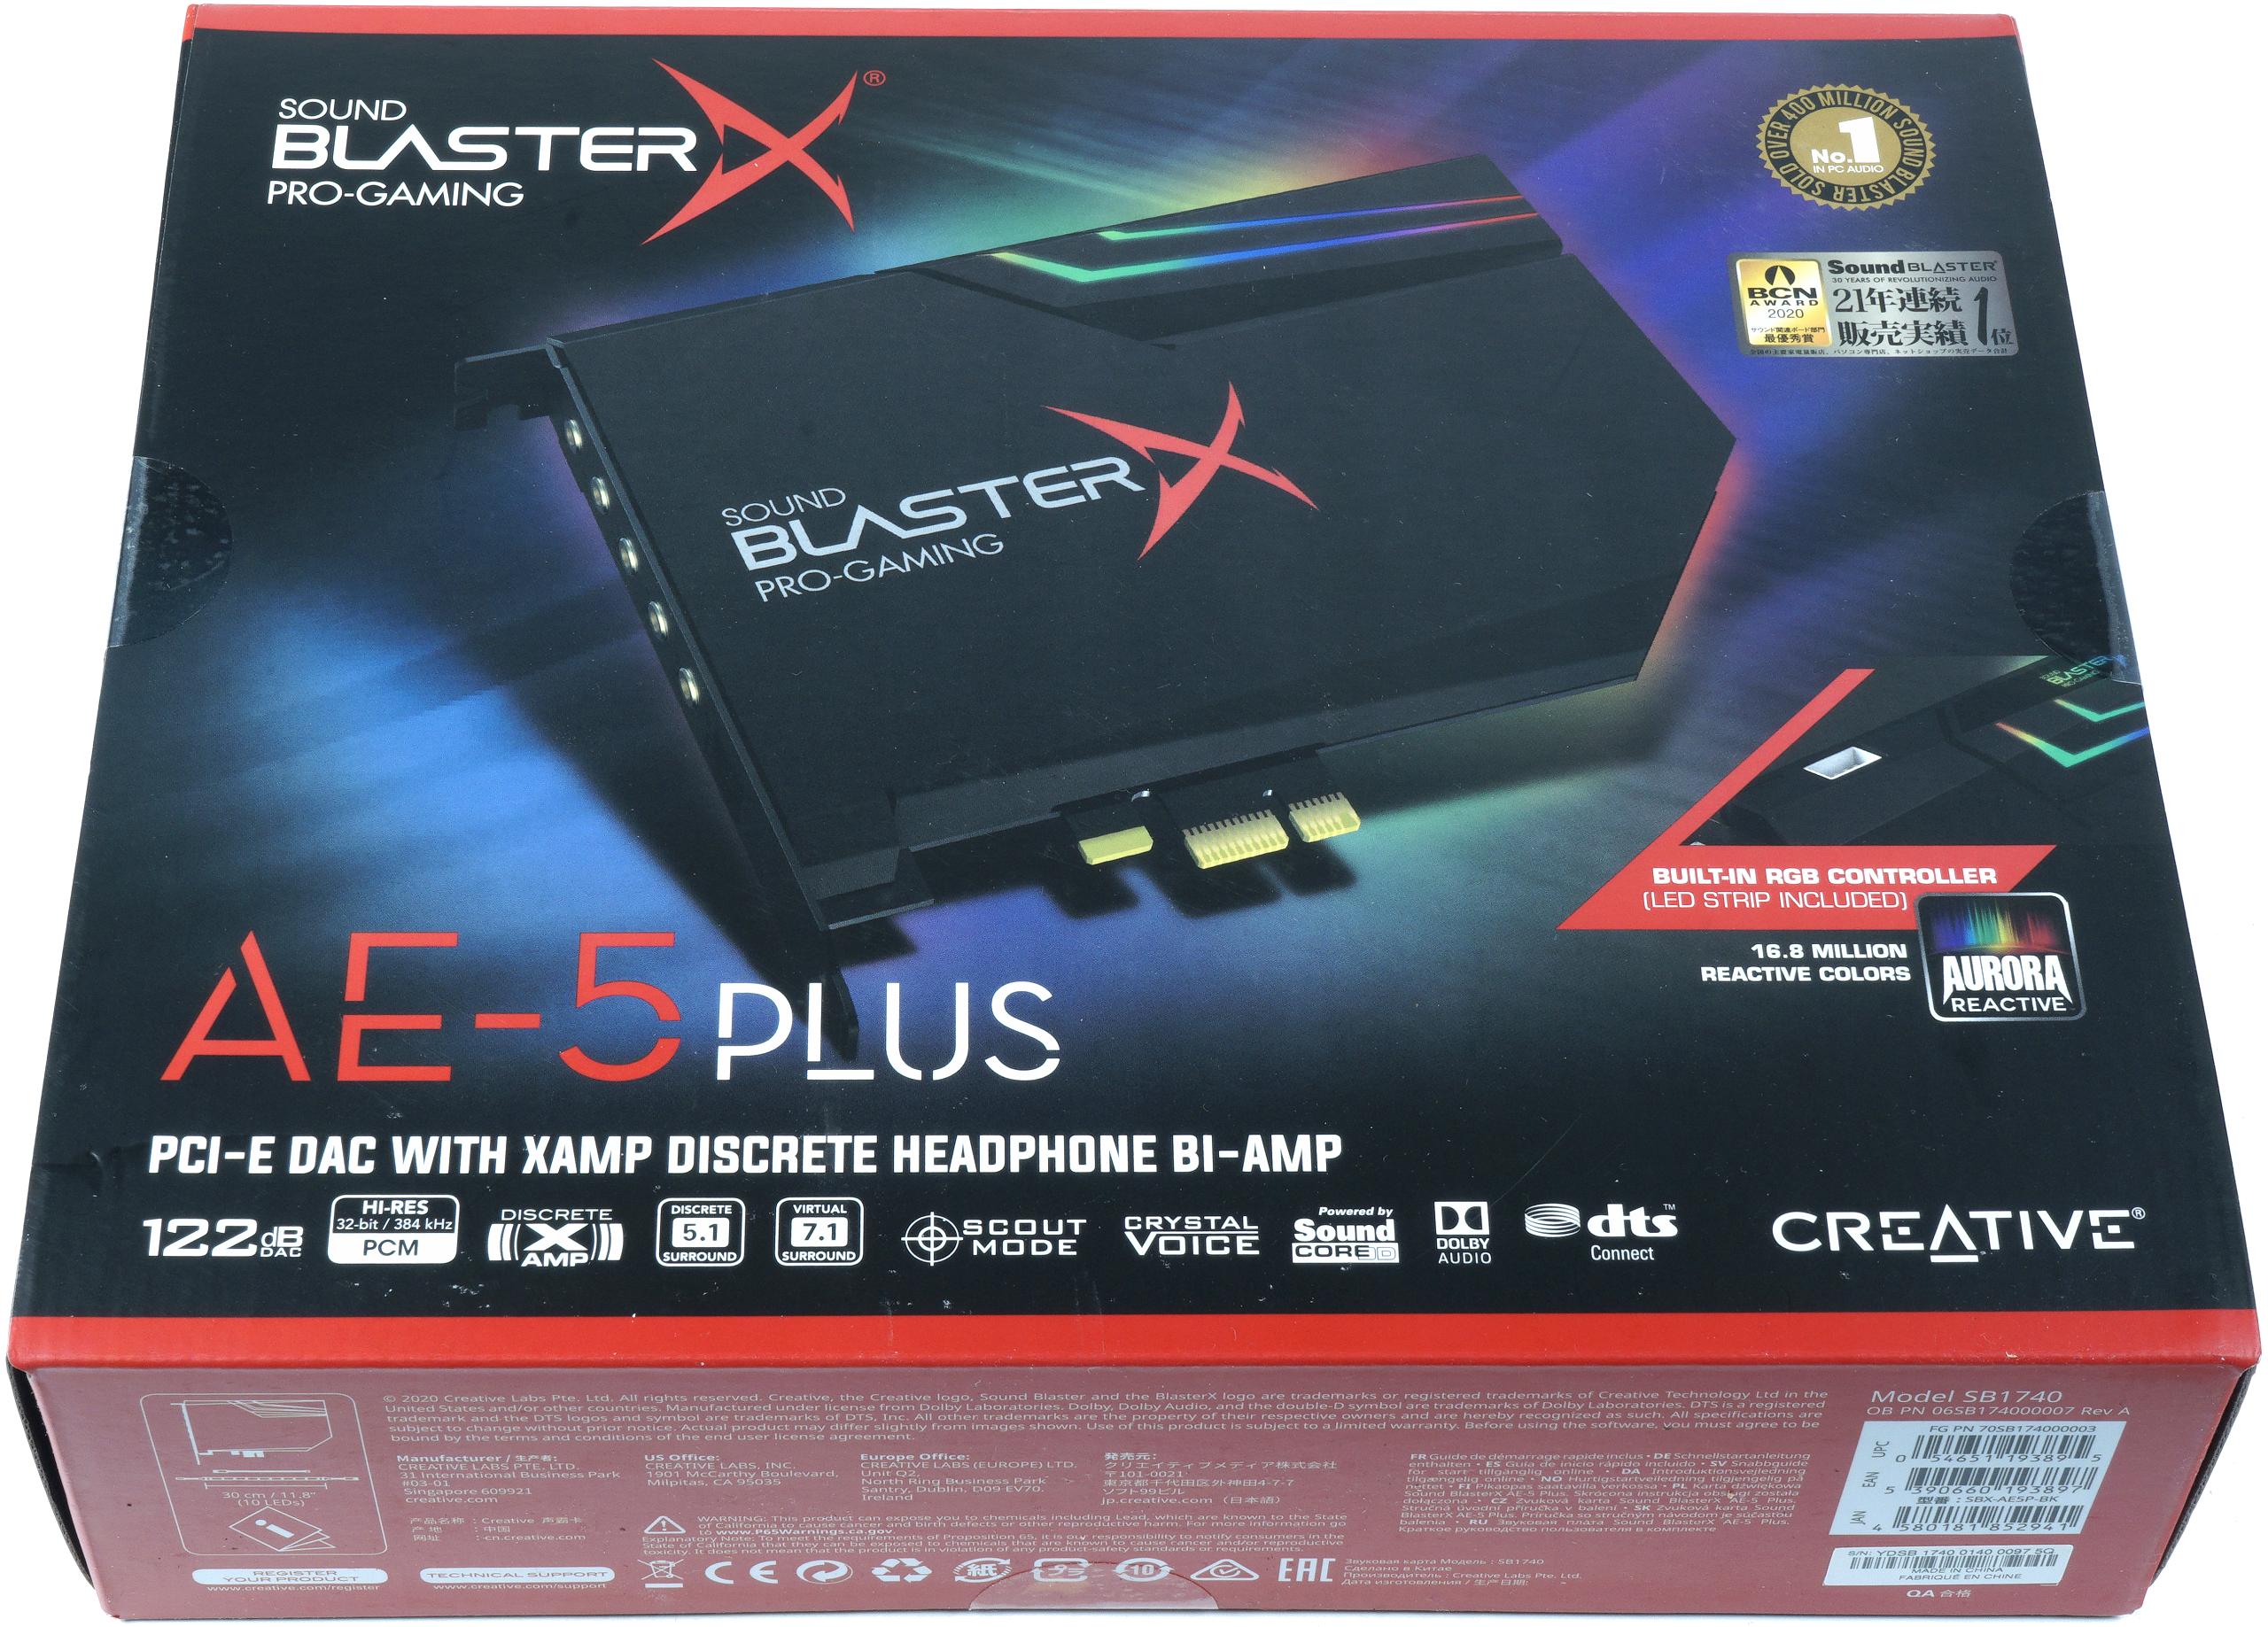 Creative Sound Blasterx Ae 5 Plus In Long Term Test Strong Sound Plus An Upgrade With Dolby Digital Live And Dts Igor Slab